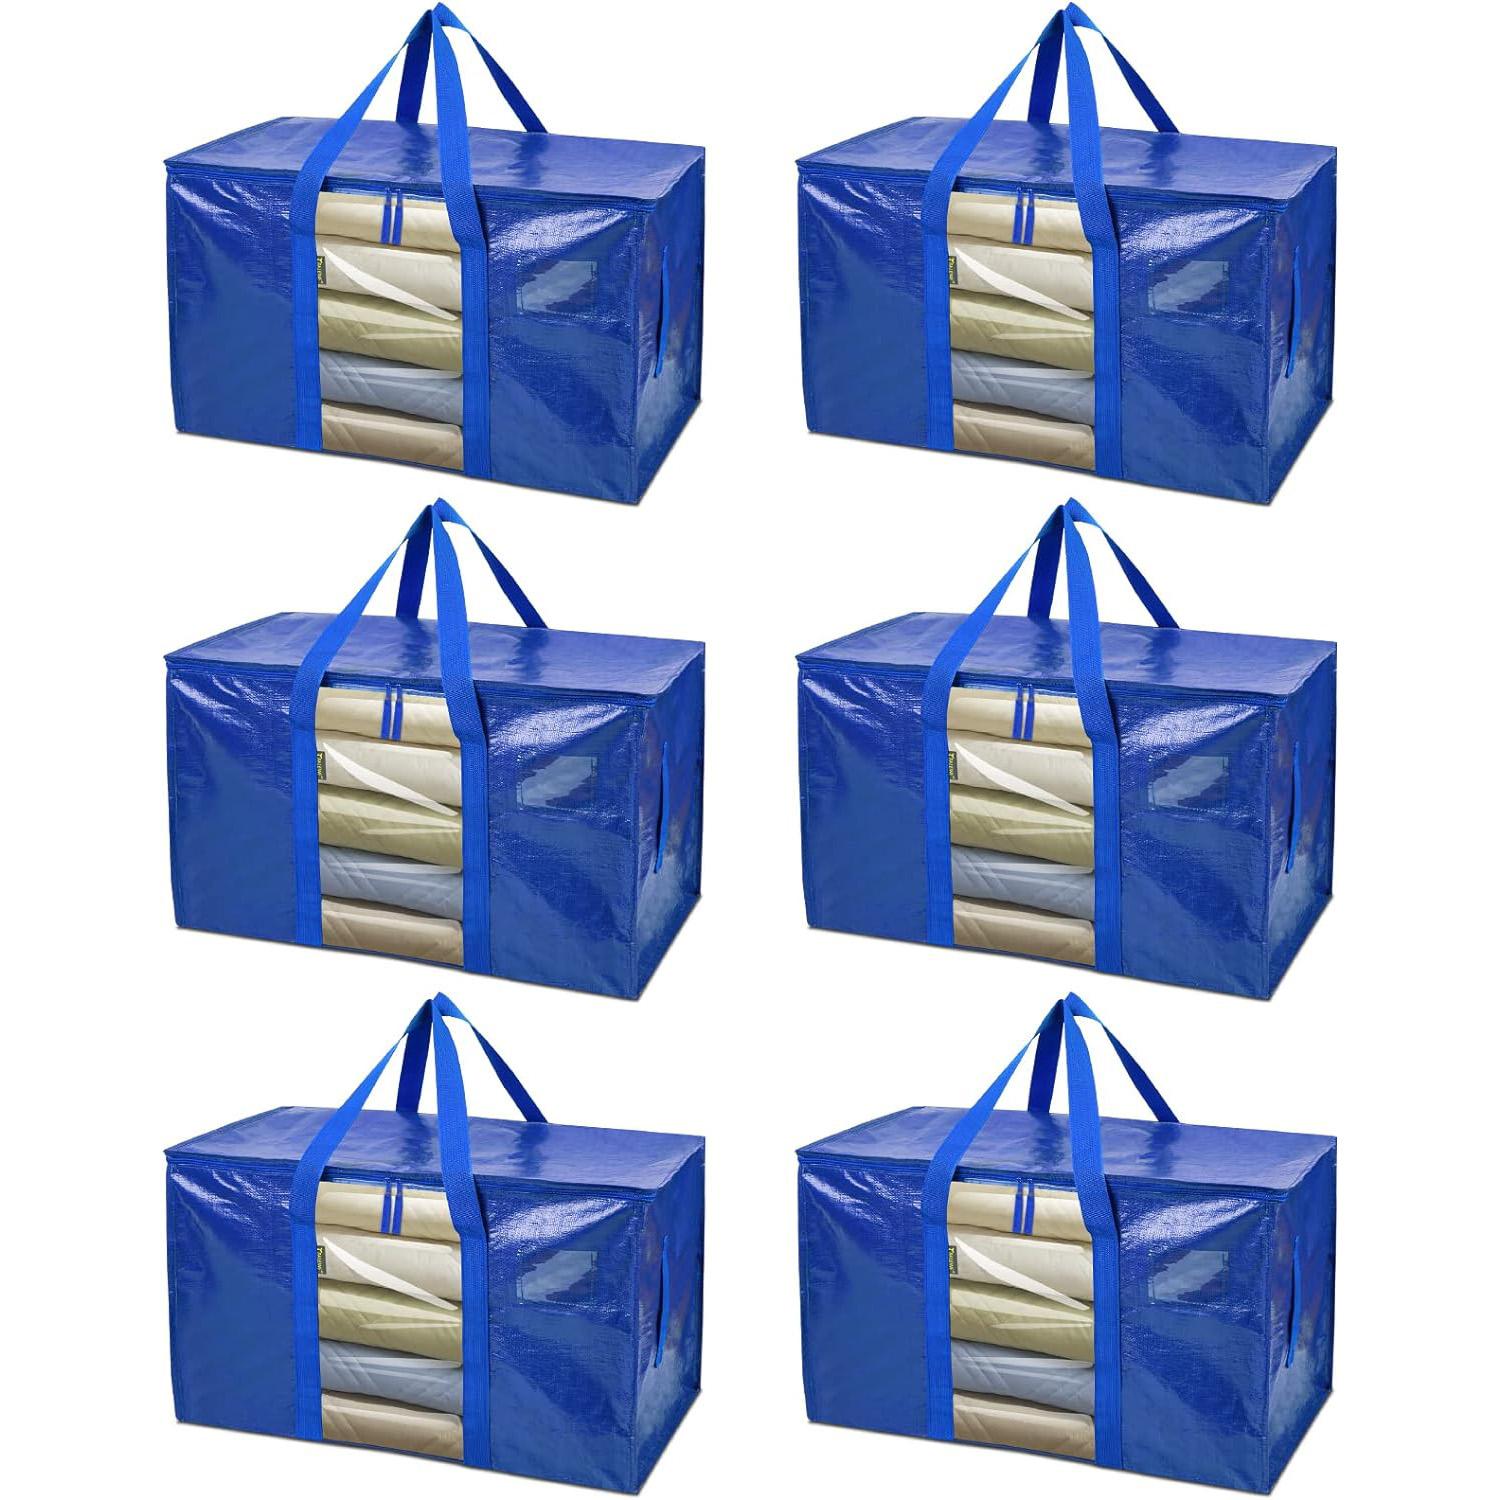 Oversized Moving Bags with Reinforced Handles 6 Pack for $11.99